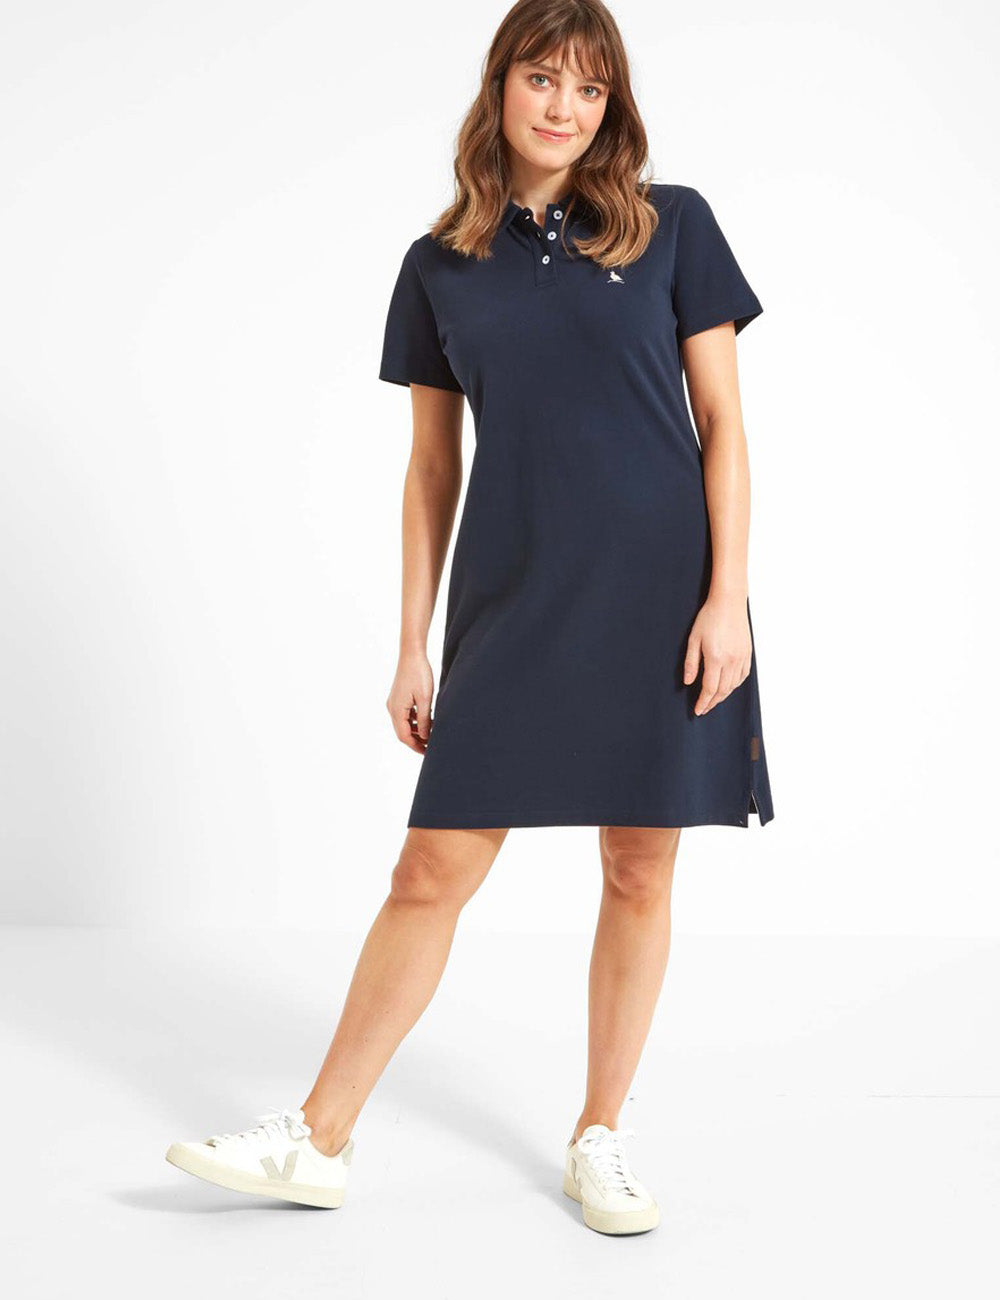 Woman wearing the St. Ives Polo dress with white trainers